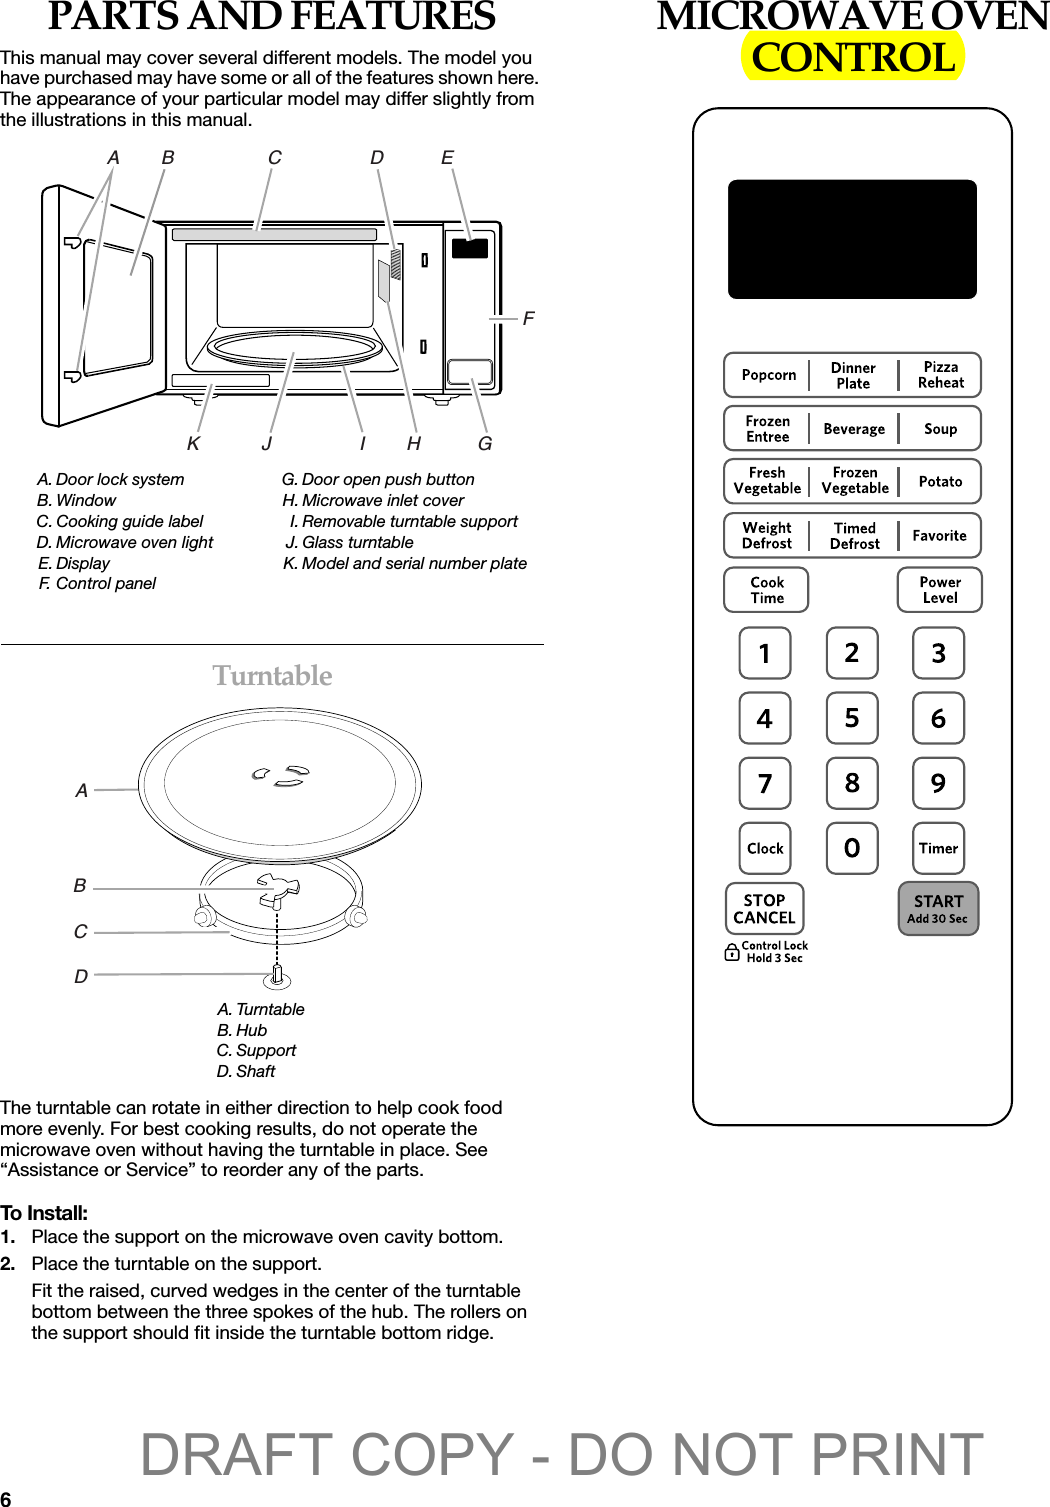 6PARTS AND FEATURESThis manual may cover several different models. The model you have purchased may have some or all of the features shown here. The appearance of your particular model may differ slightly from the illustrations in this manual. TurntableThe turntable can rotate in either direction to help cook food more evenly. For best cooking results, do not operate the microwave oven without having the turntable in place. See “Assistance or Service” to reorder any of the parts.To Install:1. Place the support on the microwave oven cavity bottom.2. Place the turntable on the support.Fit the raised, curved wedges in the center of the turntable bottom between the three spokes of the hub. The rollers on the support should fit inside the turntable bottom ridge.MICROWAVE OVEN CONTROLA. Door lock systemB. WindowC. Cooking guide labelD. Microwave oven lightE. DisplayF. Con trol  p a n e lG. Door open push buttonH. Microwave inlet coverI. Removable turntable supportJ. Glass turntableK. Model and serial number plateA. TurntableB. HubC. SupportD. ShaftA        B                  C                 D           EK            J                 I        H           GFABCDDRAFT COPY - DO NOT PRINT